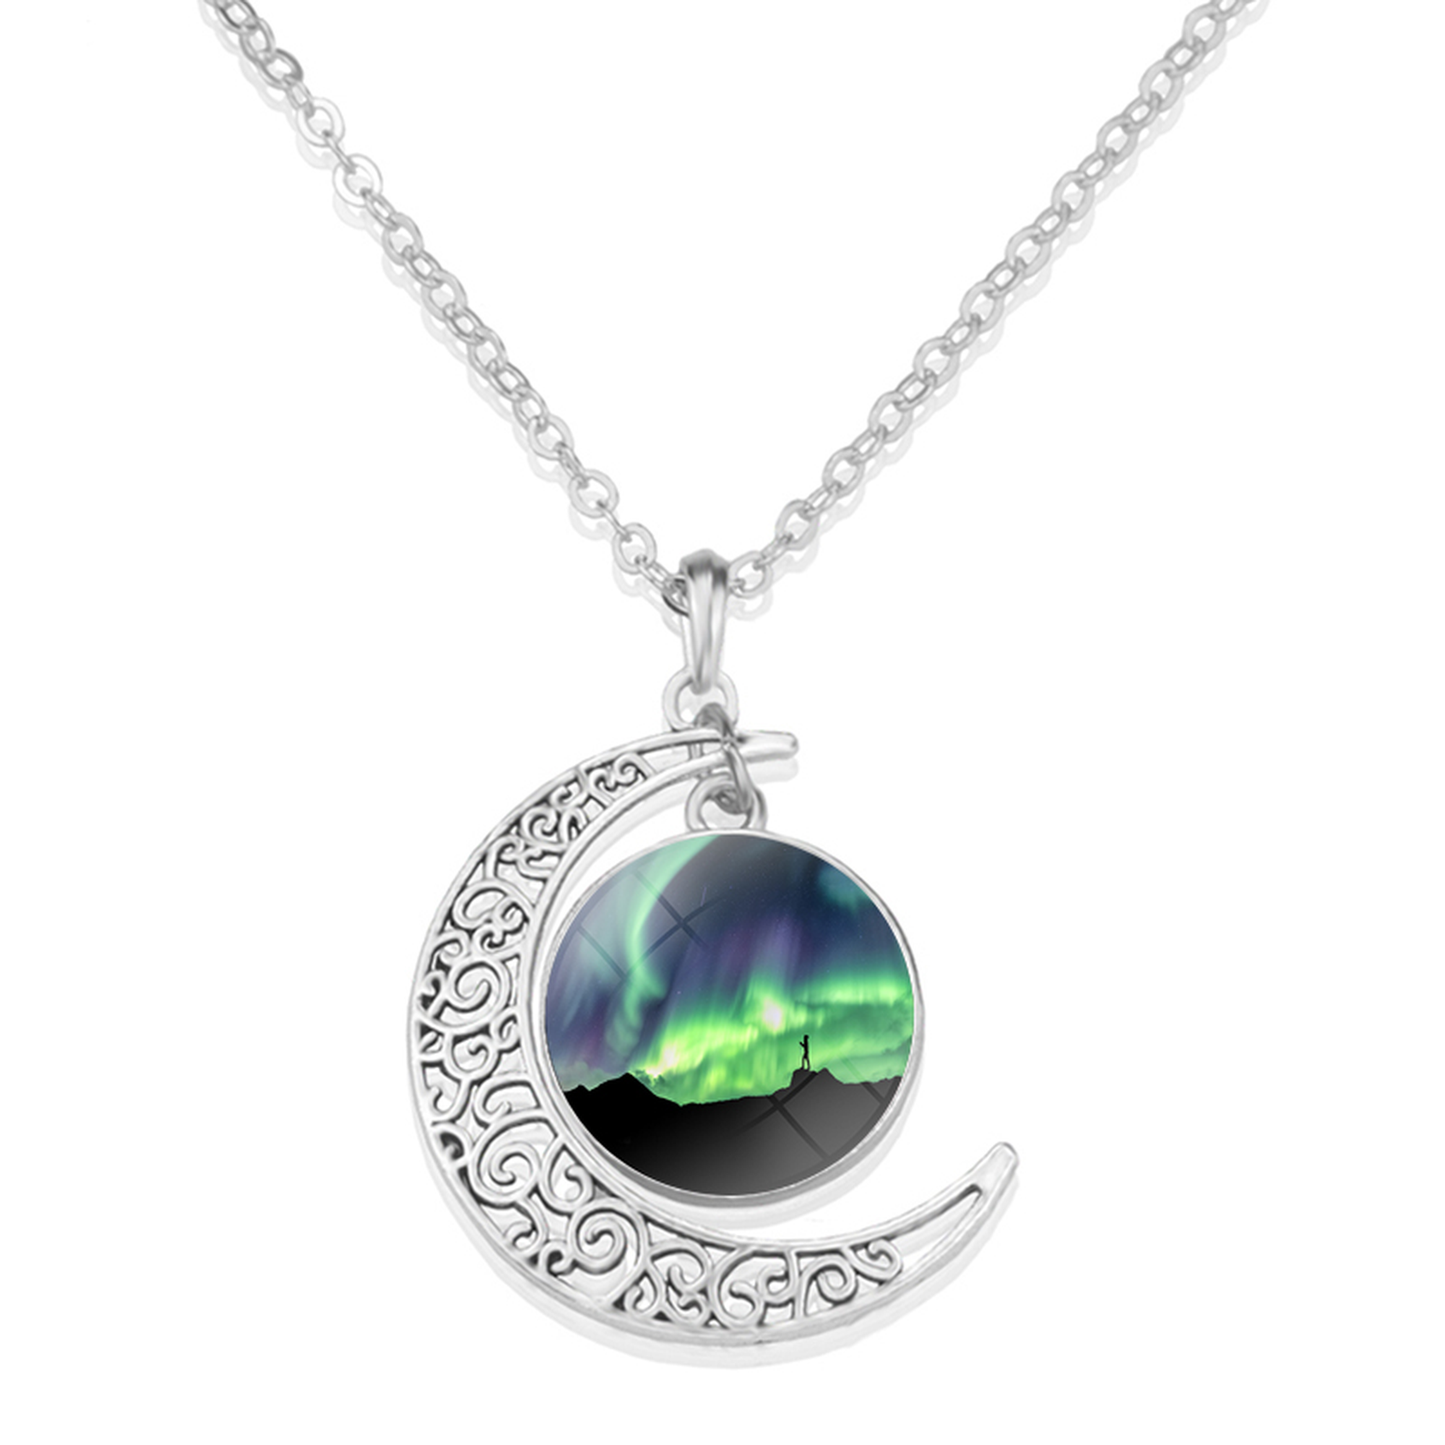 Unique Aurora Borealis Crescent Necklace - Northern Light Jewelry - Crescent Glass Cabochon Pendent Necklace - Perfect Aurora Lovers Gift 8